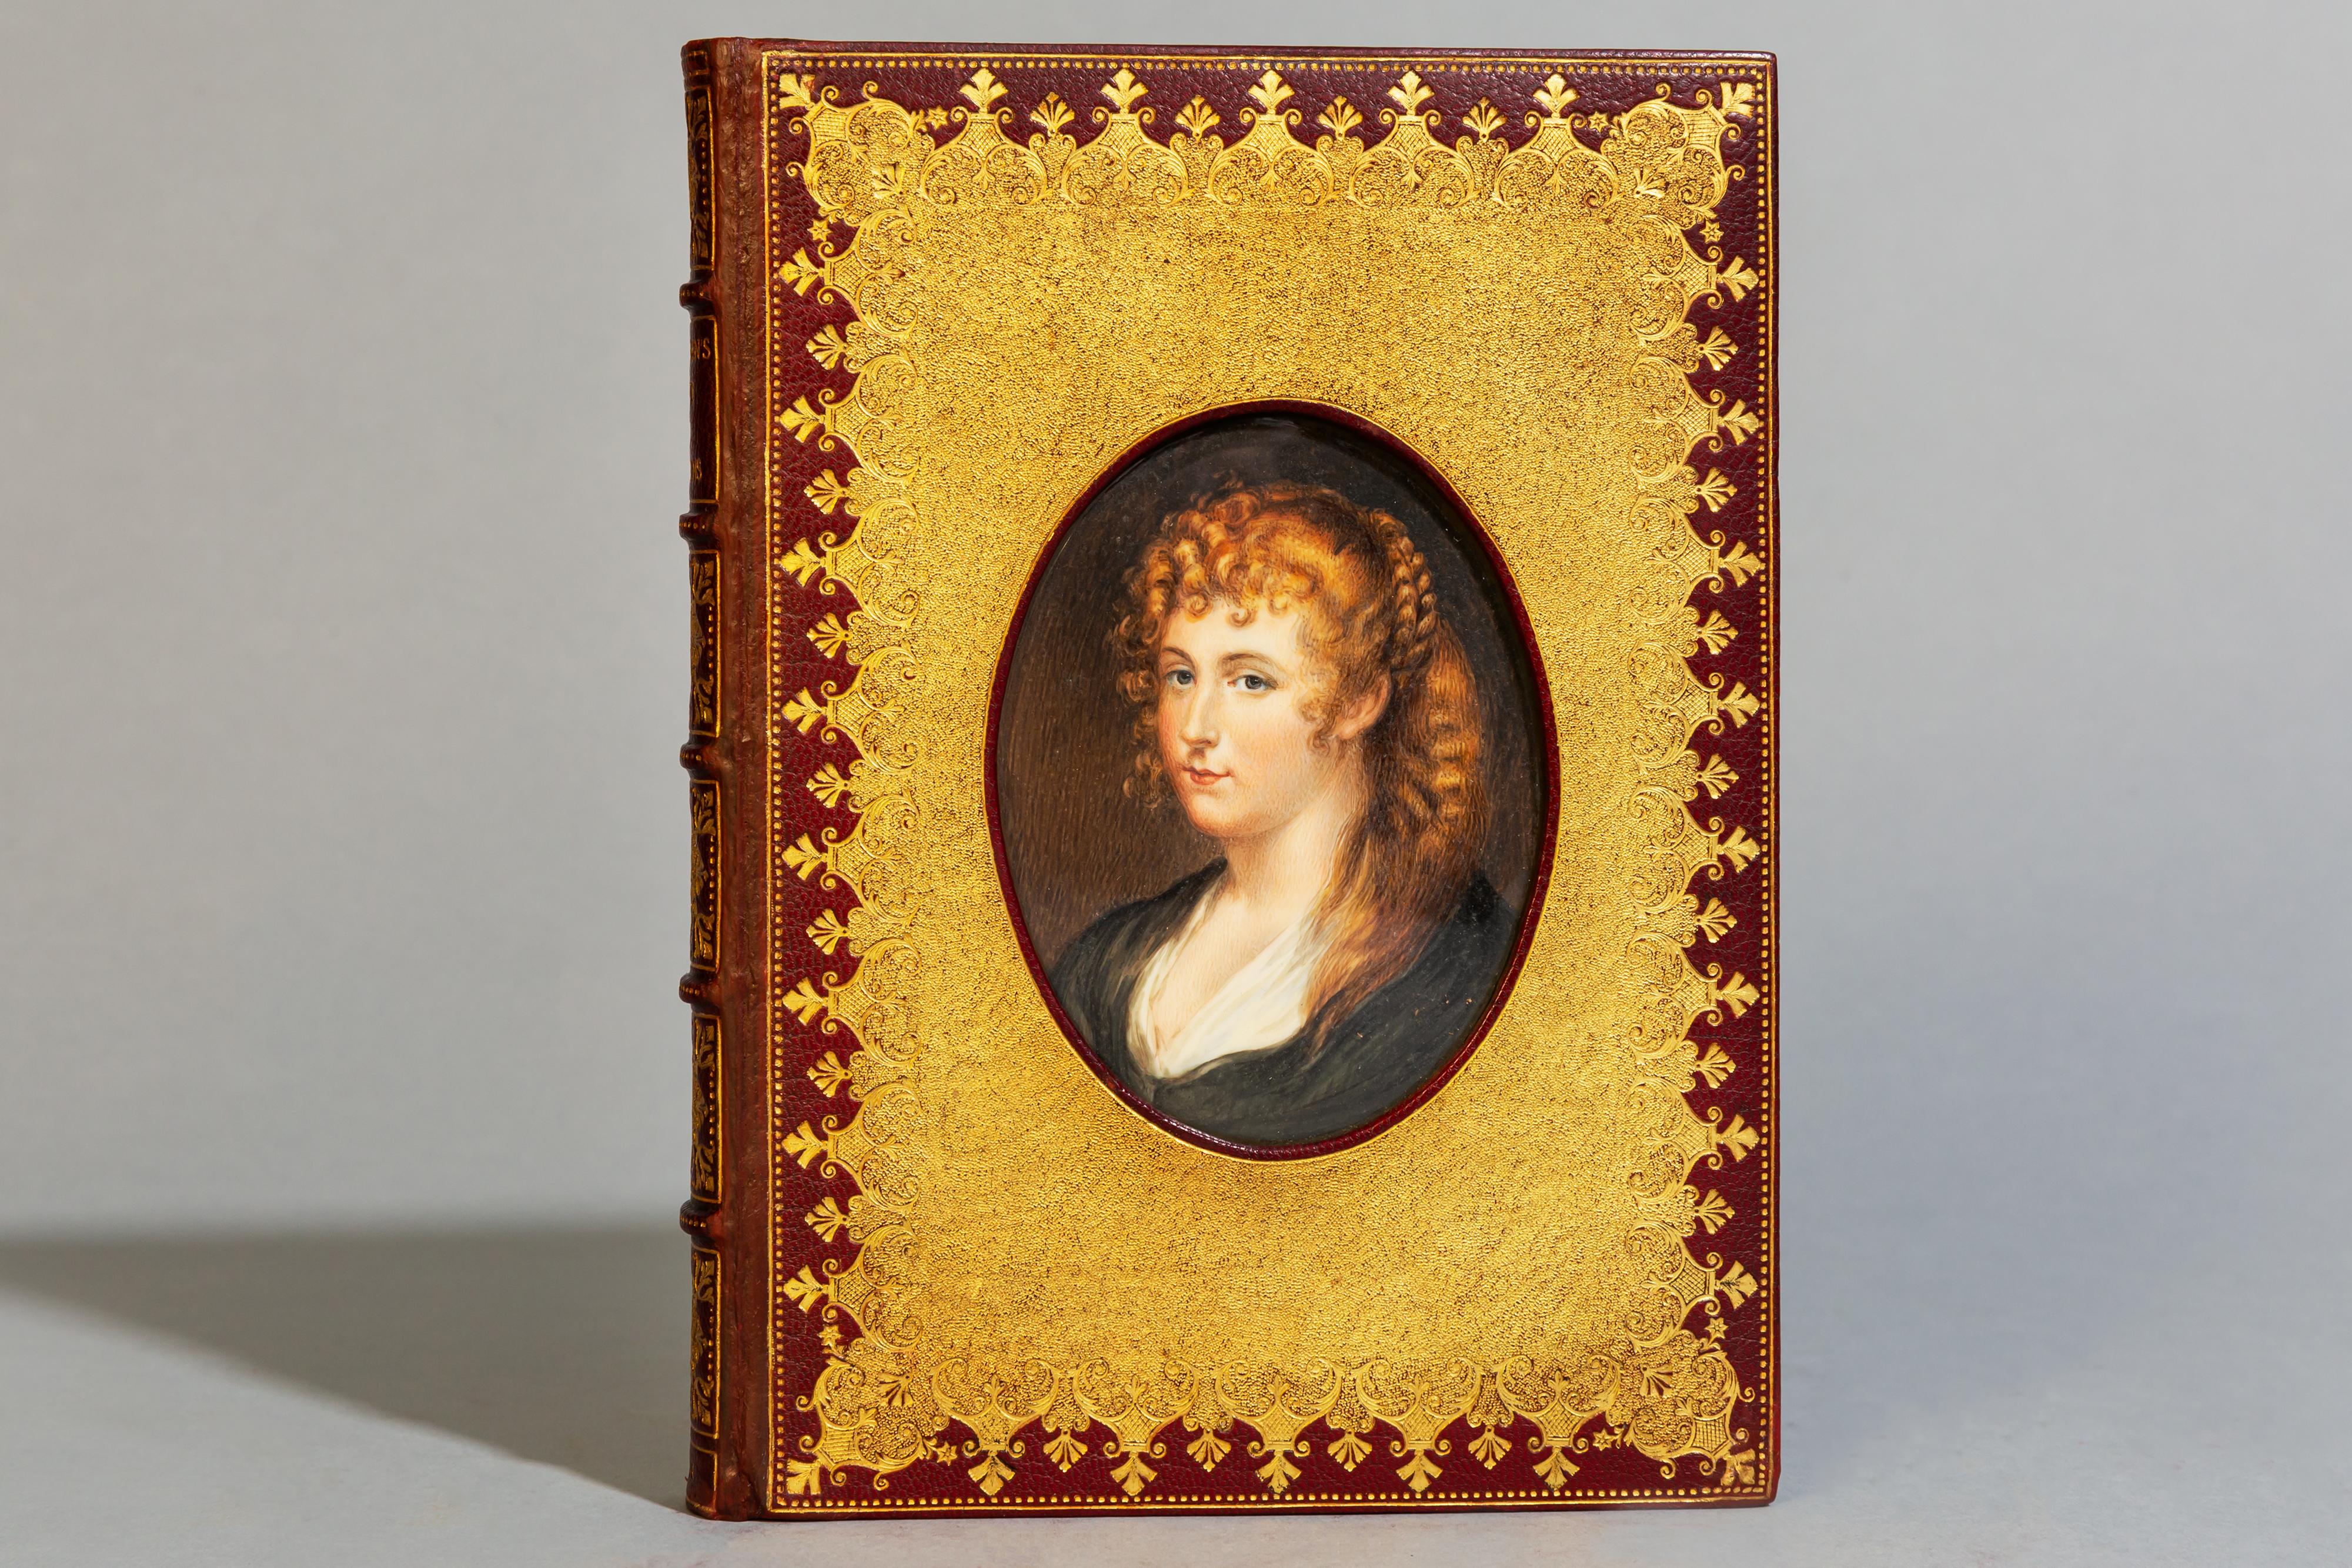 Translated from the German by Dr. Waagen, Edited by Mrs. Jameson. Bound in full red Morocco with a portrait miniature on front cover by Riviere, green silk doublers, top edges gilt, raised bands, ornate gilt on front cover, gilt panels. “Cosway